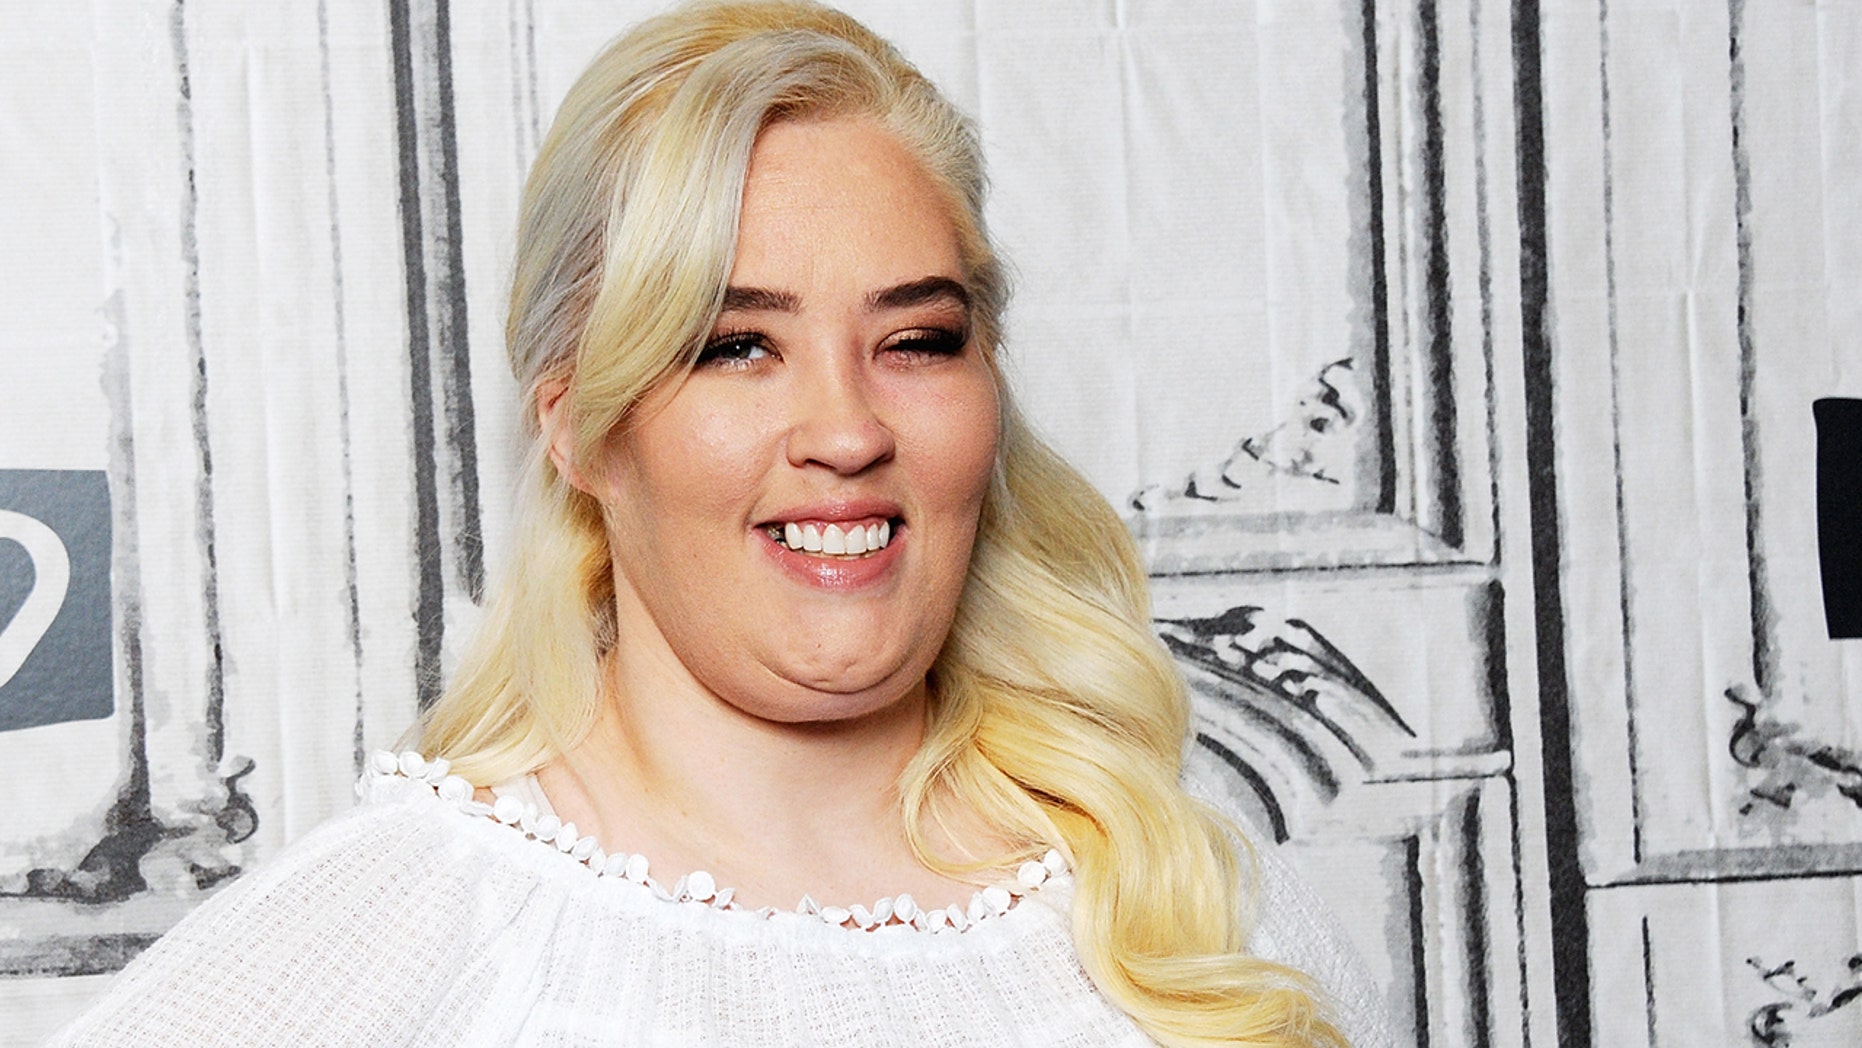 Mama June From Honey Boo Boo Arrested On Suspicion Of Drug Possession After Domestic Dispute